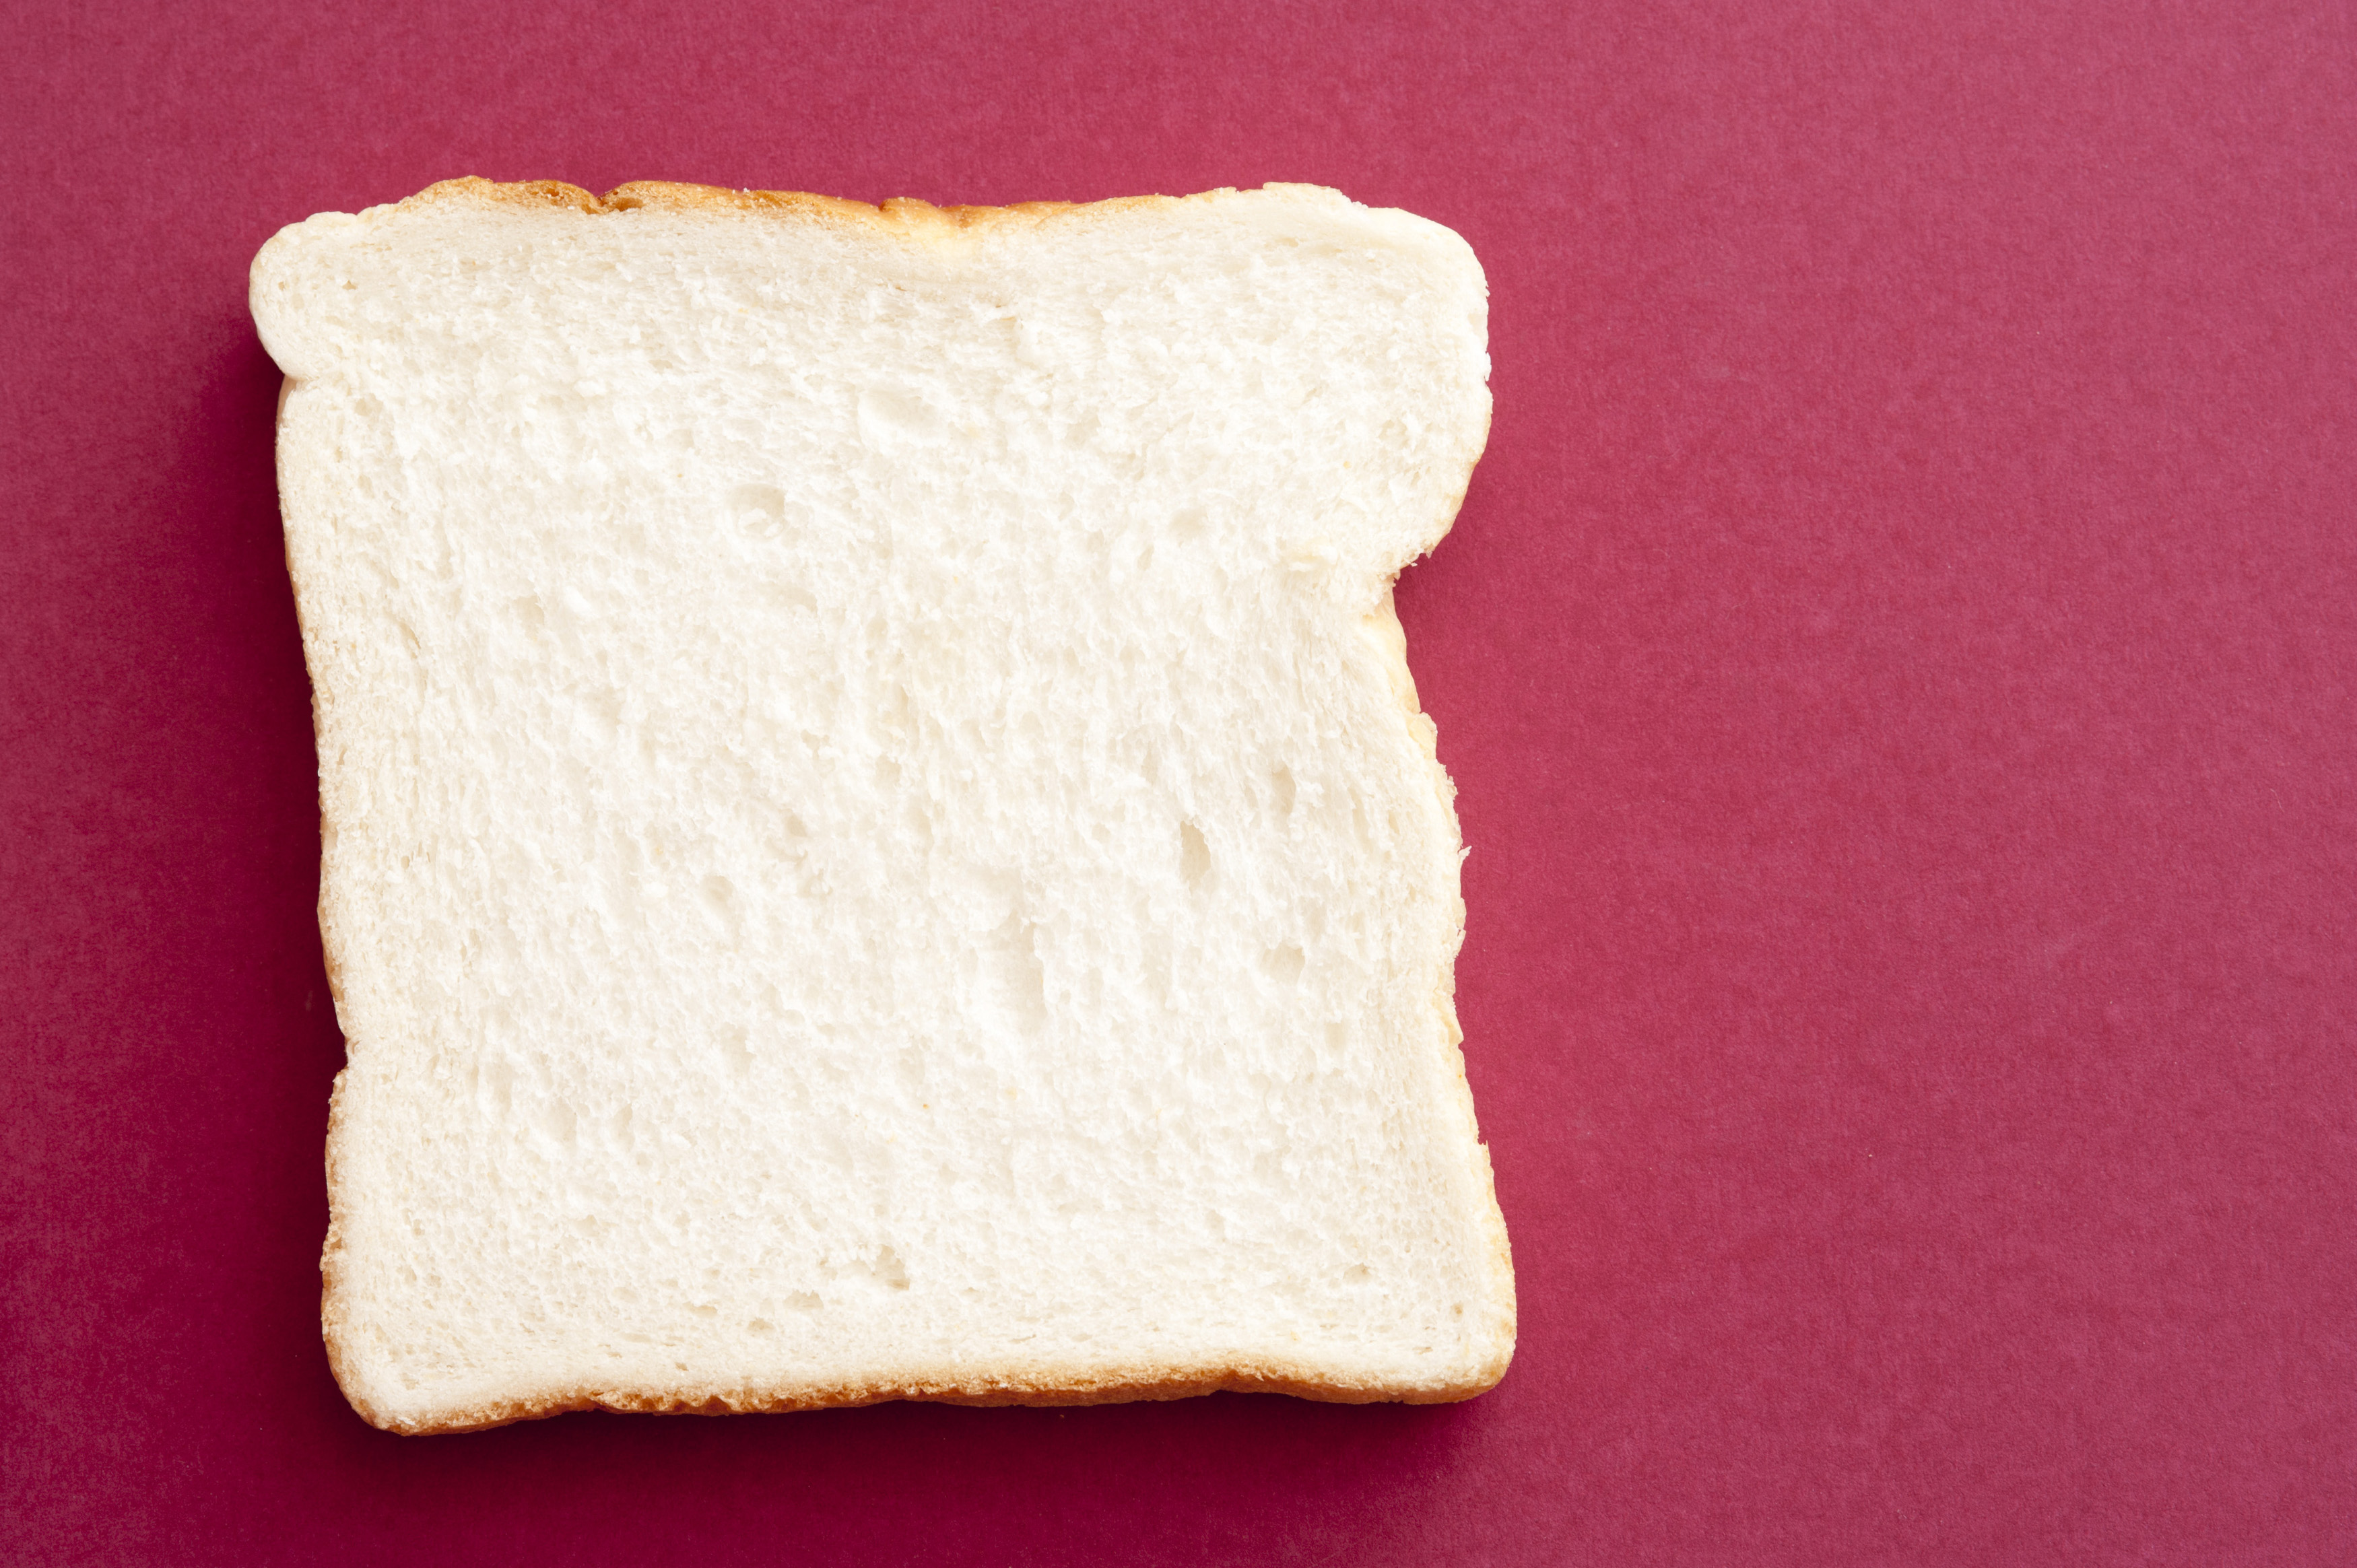 One slice of white bread - Free Stock Image